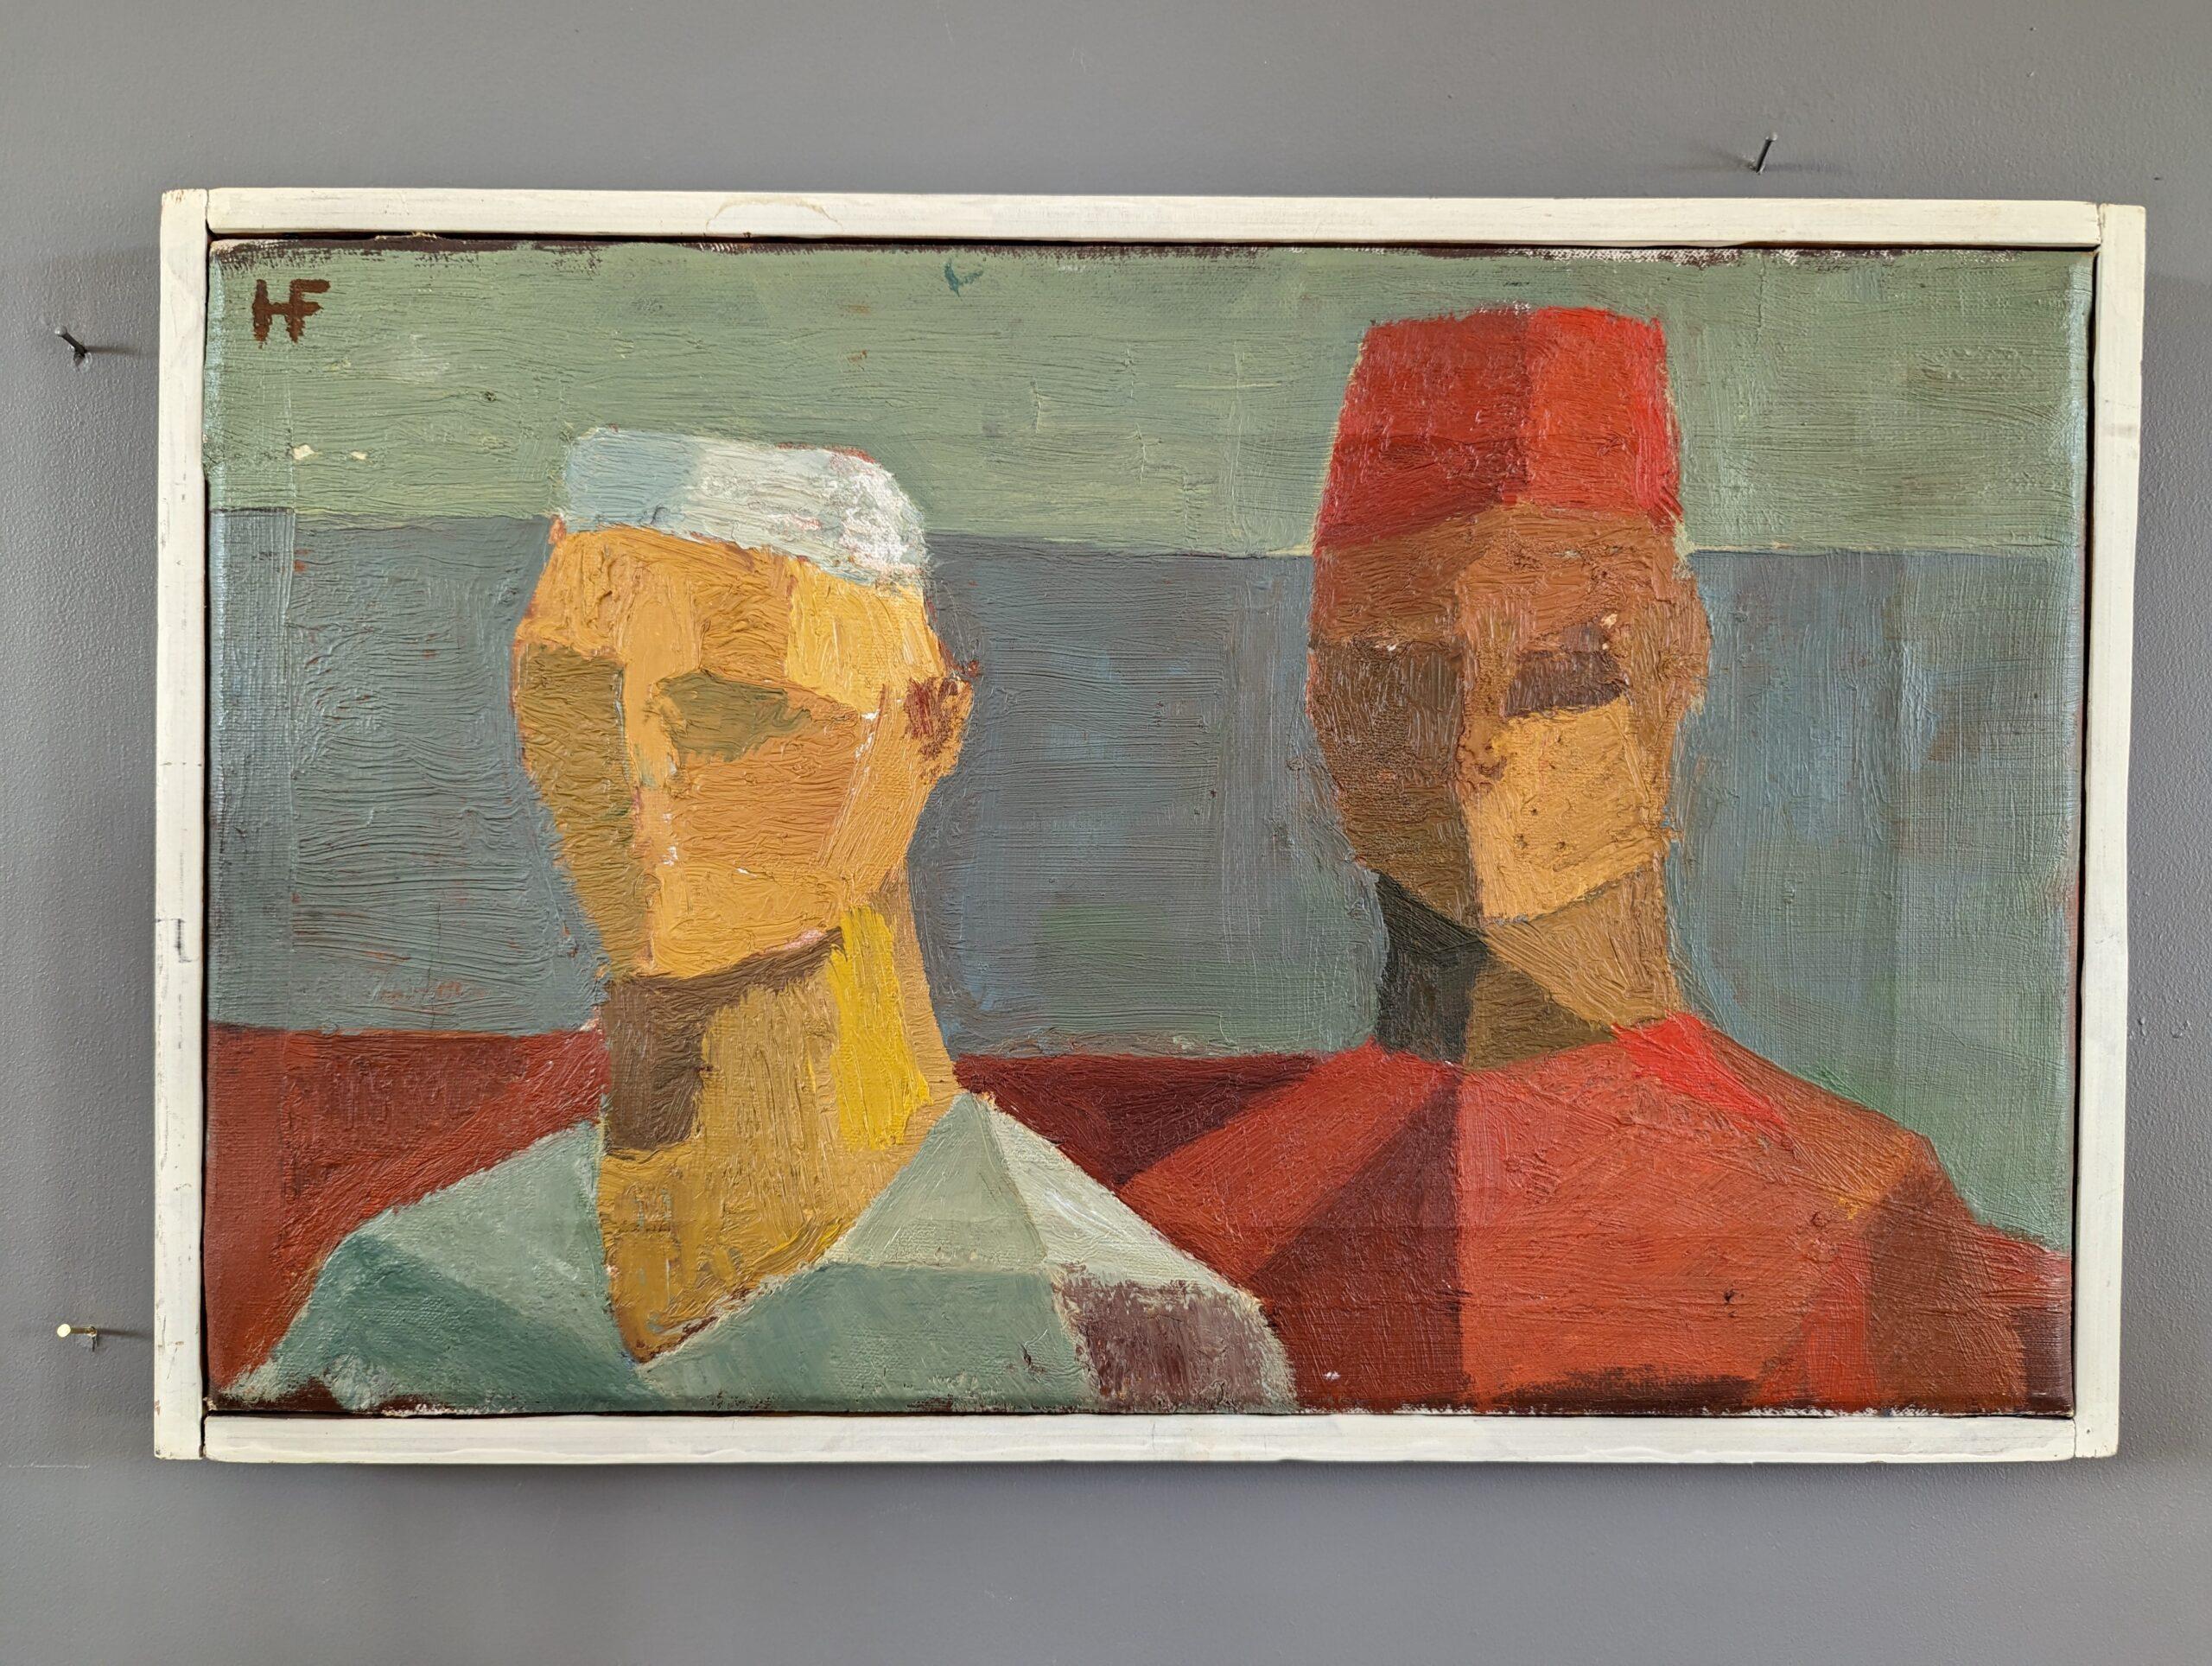 FIGURES IN HATS
Size: 29 x 44.5 cm (including frame)
Oil on Canvas 

A well-executed mid-century modernist figurative composition, painted in oil onto canvas.

Depicted here are 2 figures, each in hats.  Their facial details have been intentionally